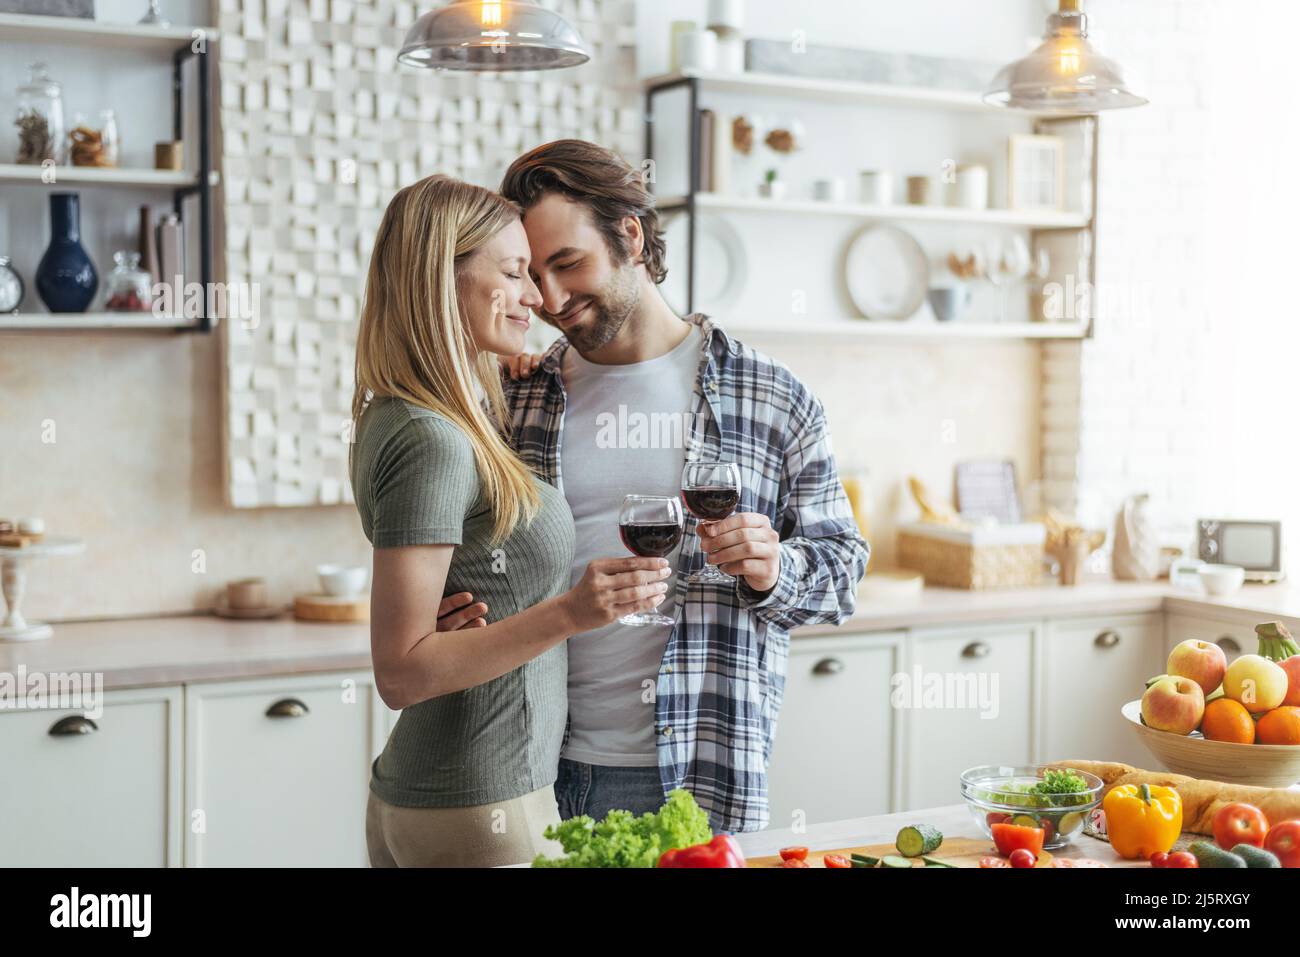 Smiling young european man with stubble and lady clinking glasses of wine, enjoy tender moment in kitchen Stock Photo